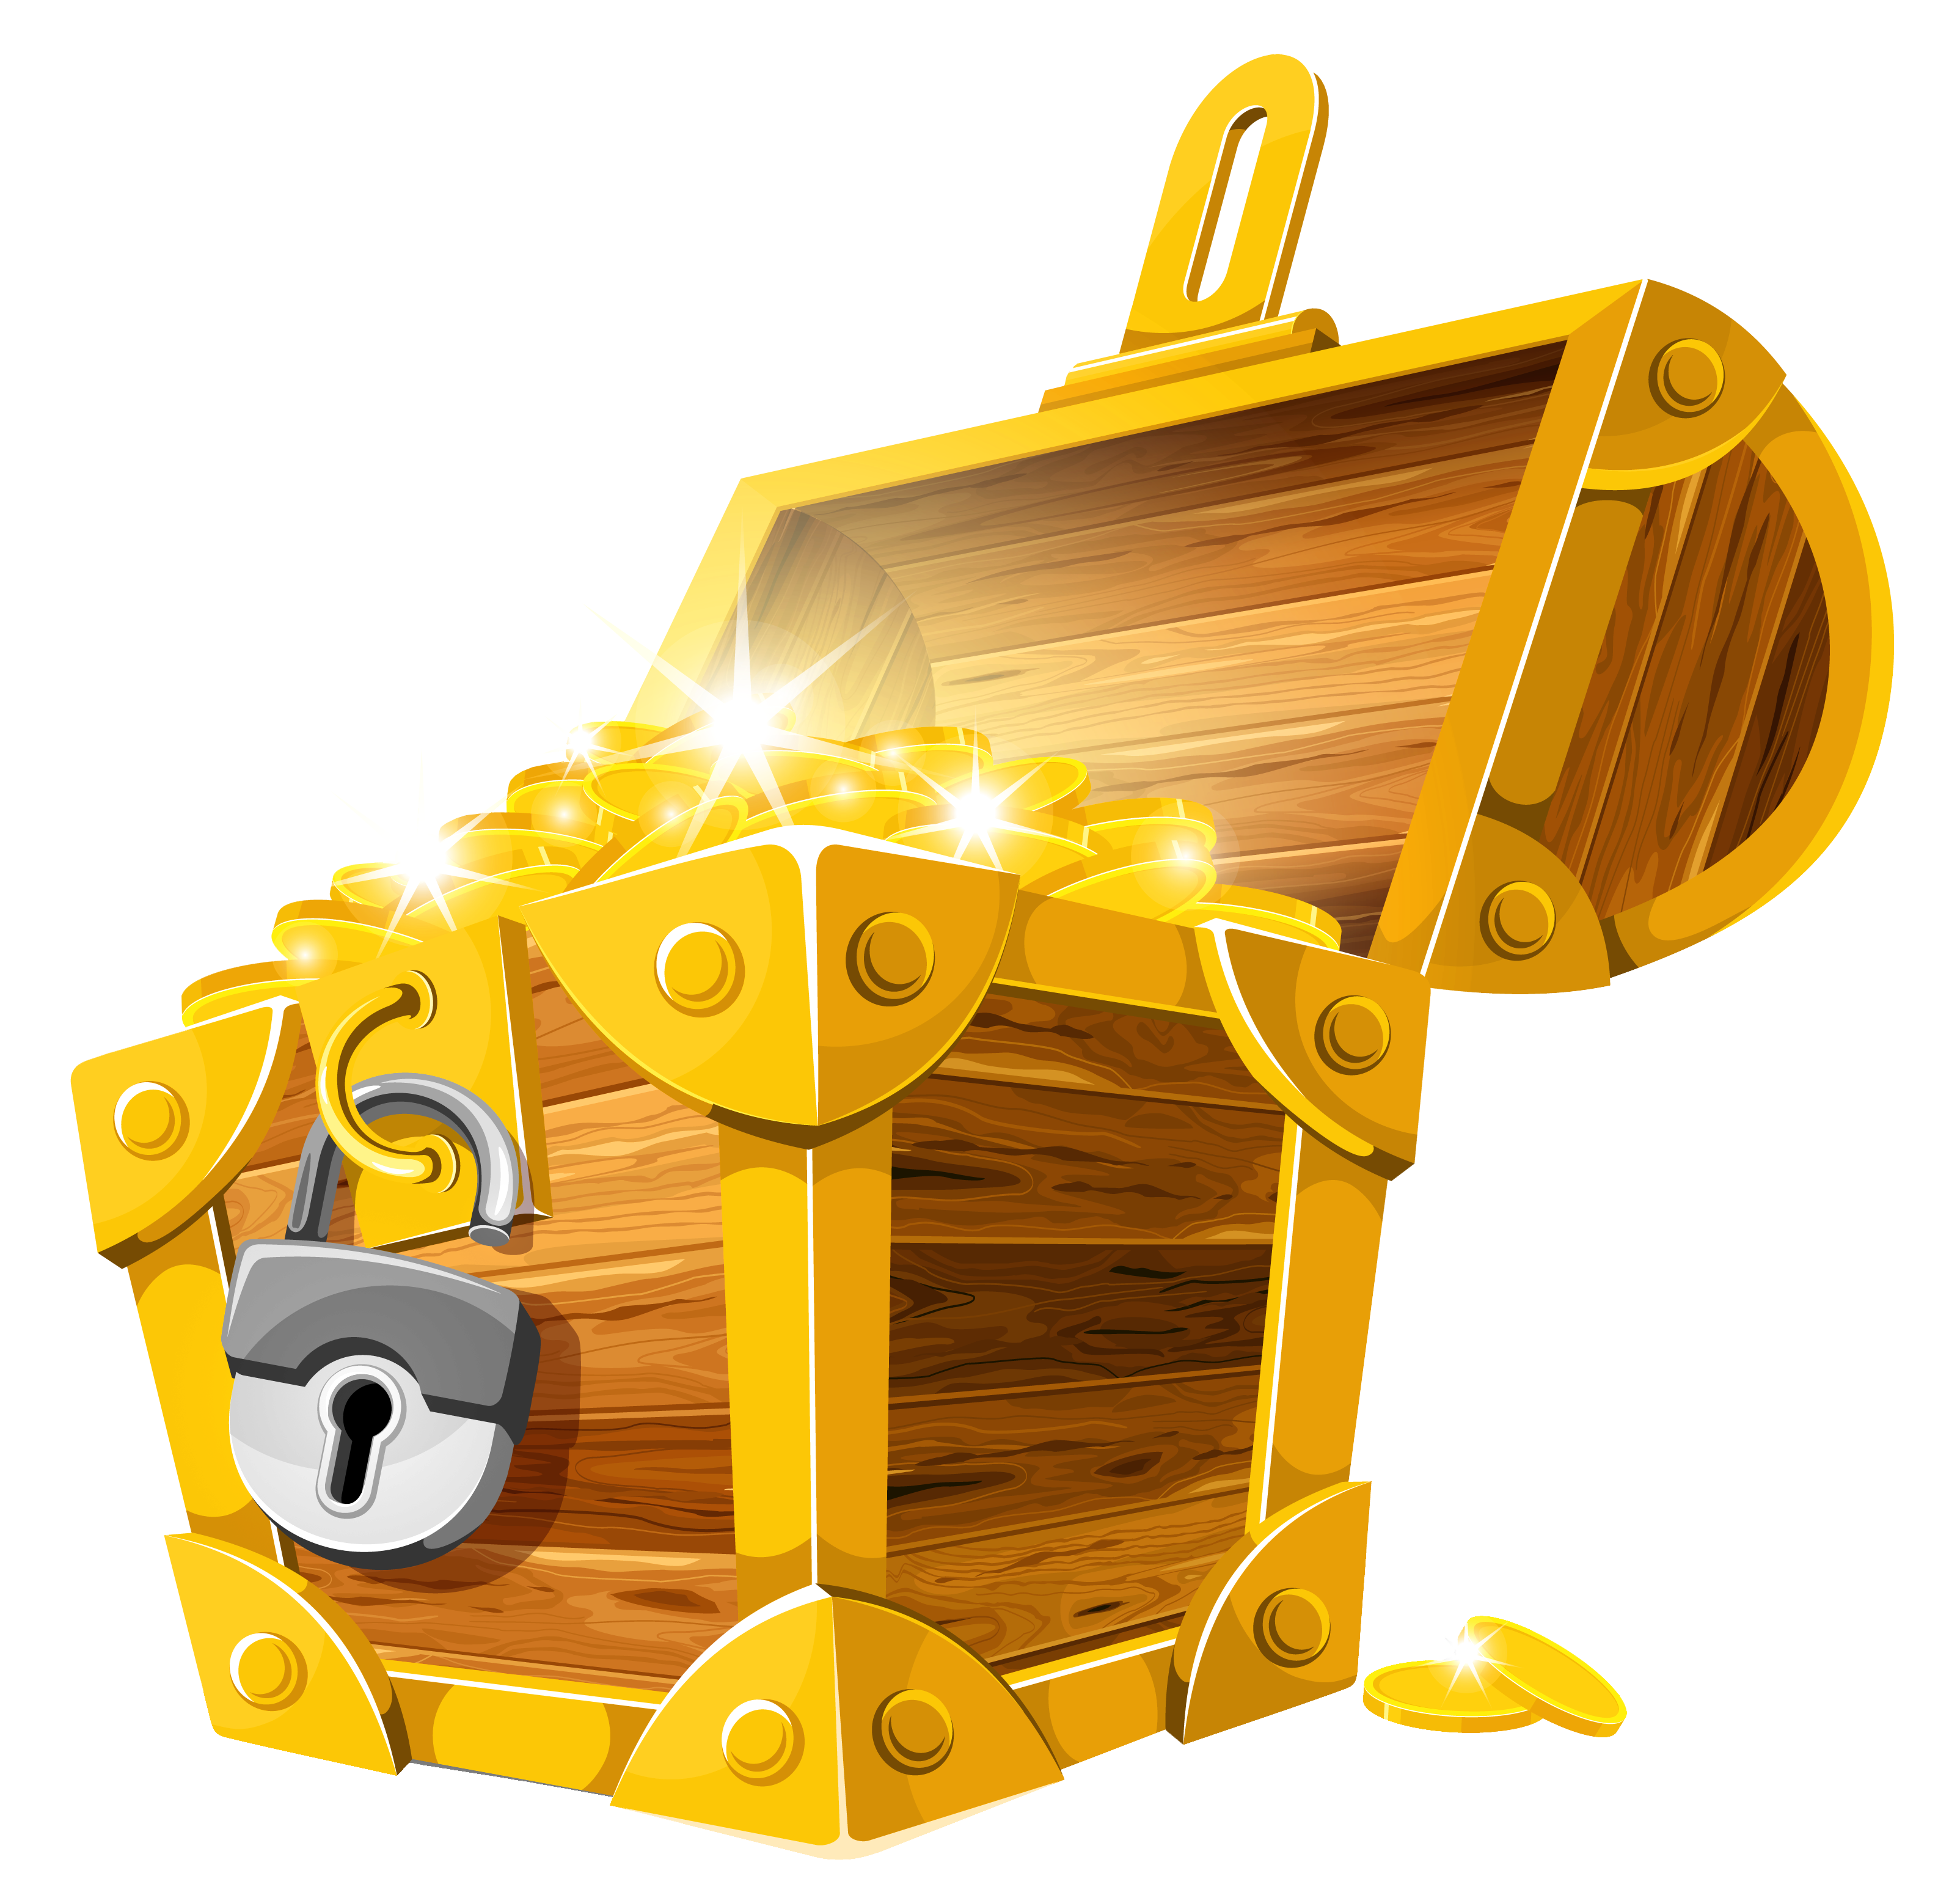 Gold Coins Treasure Chest Picture Png Image Clipart